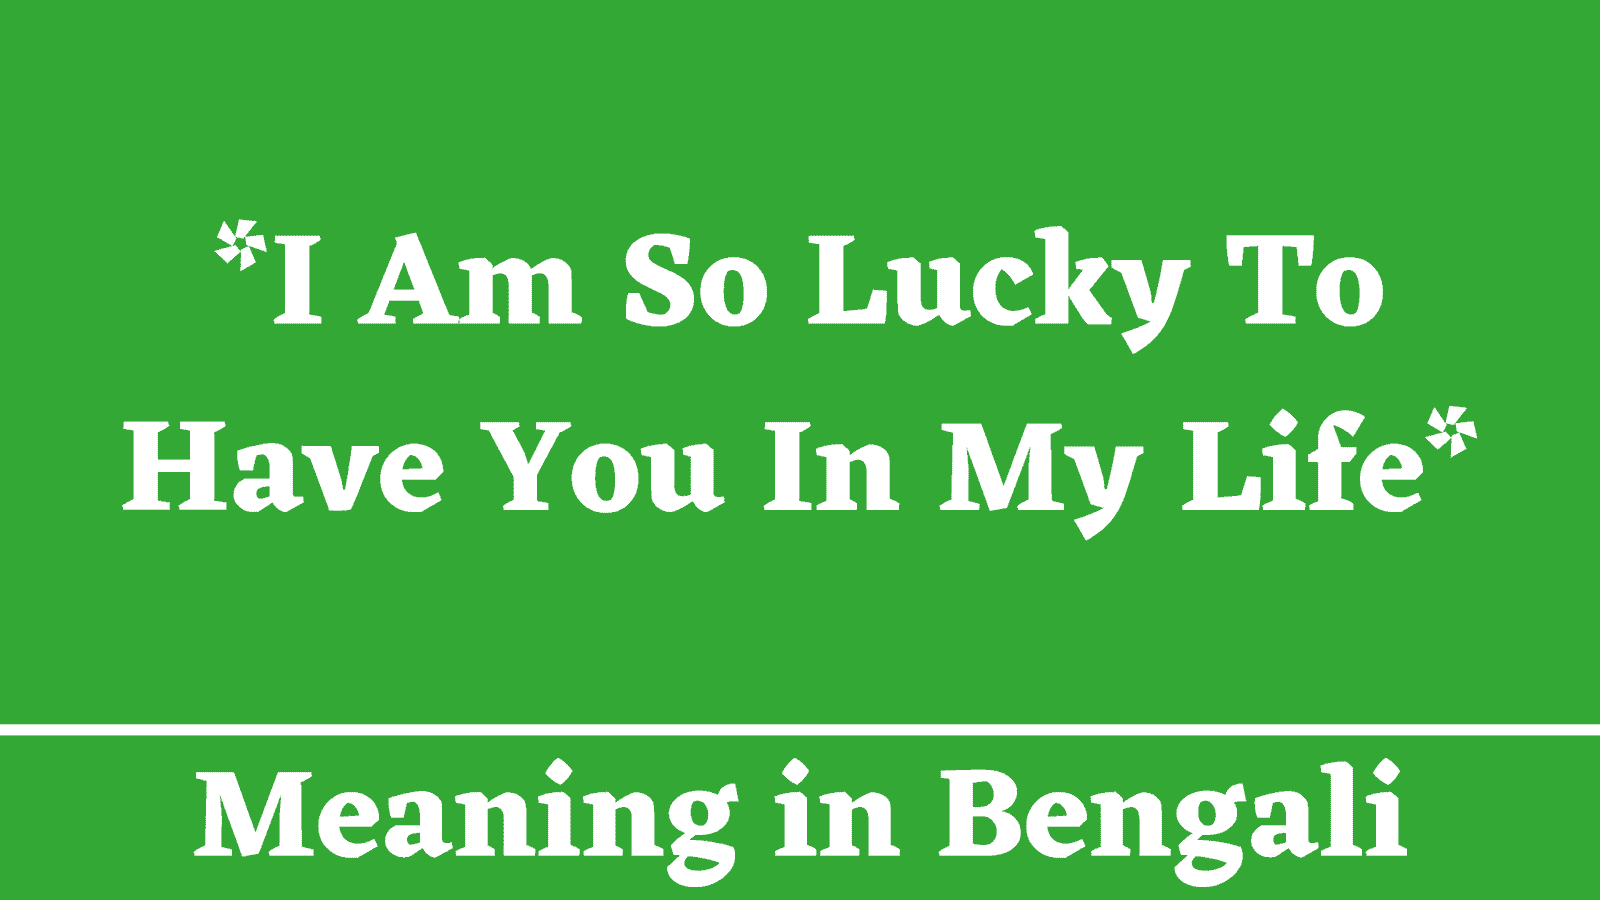 I Am So Lucky To Have You In My Life Meaning in Bengali